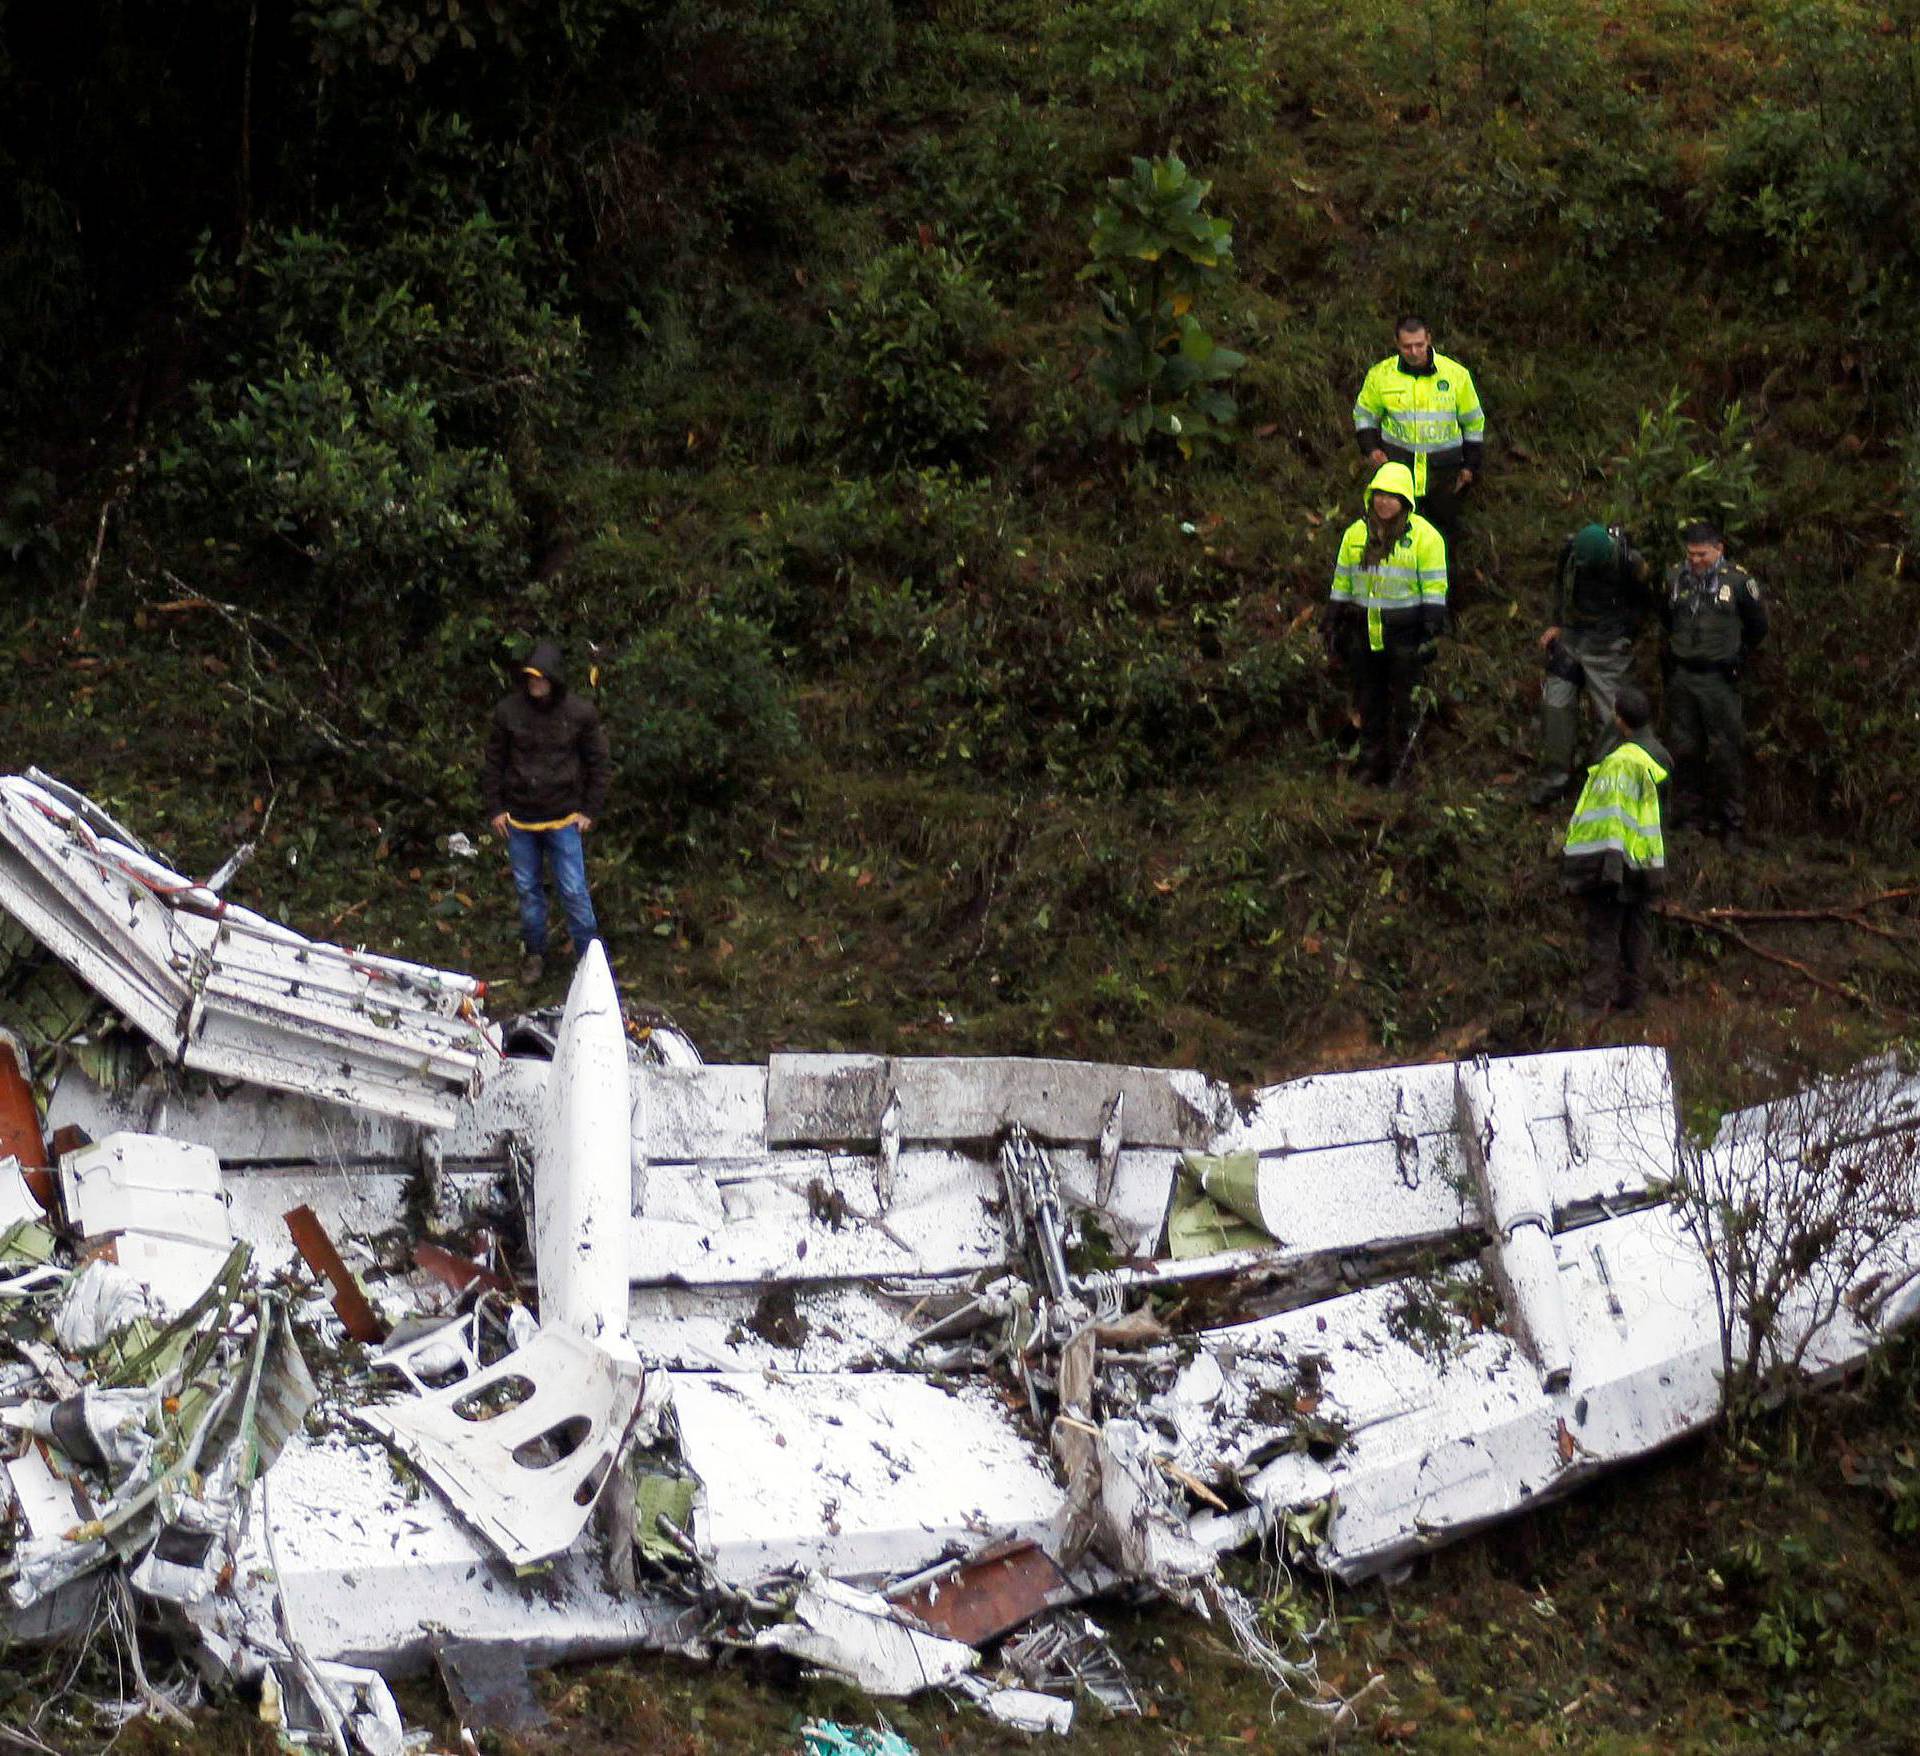 Rescue crew work in the wreckage from a plane that crashed into Colombian jungle with Brazilian soccer team Chapecoense near Medellin